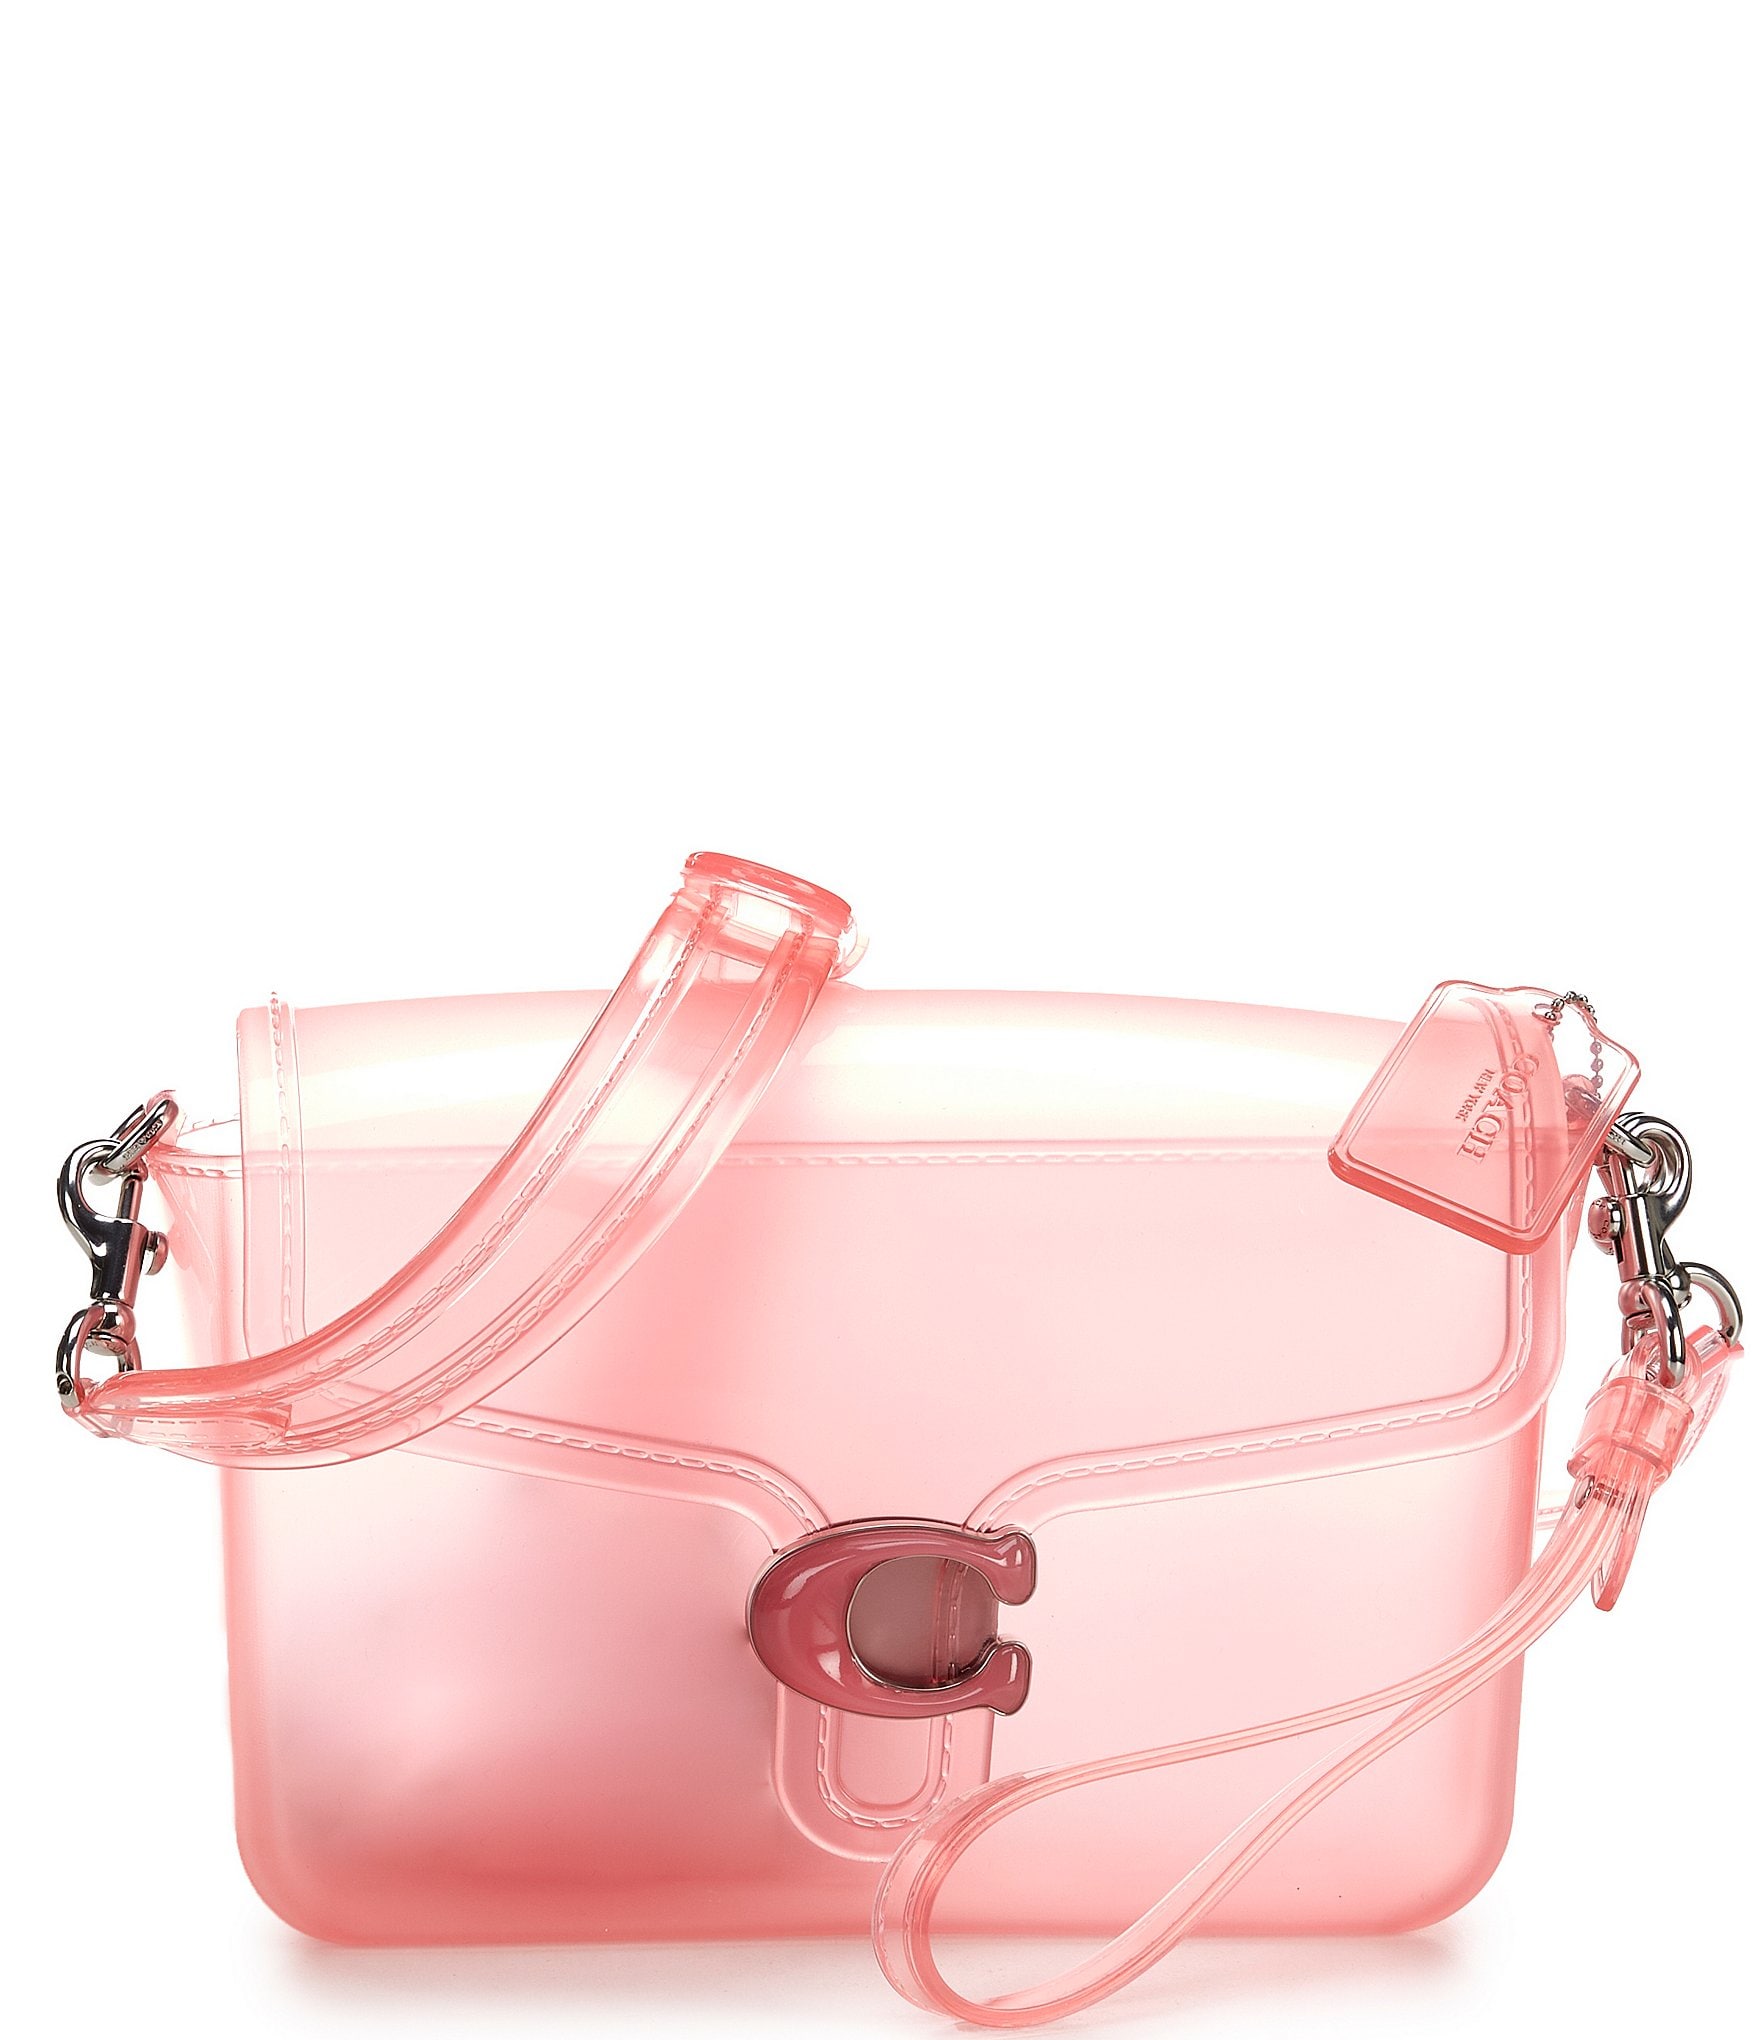 Coach Jelly Tabby Convertible Clear Bag - Silver/Flower Pink